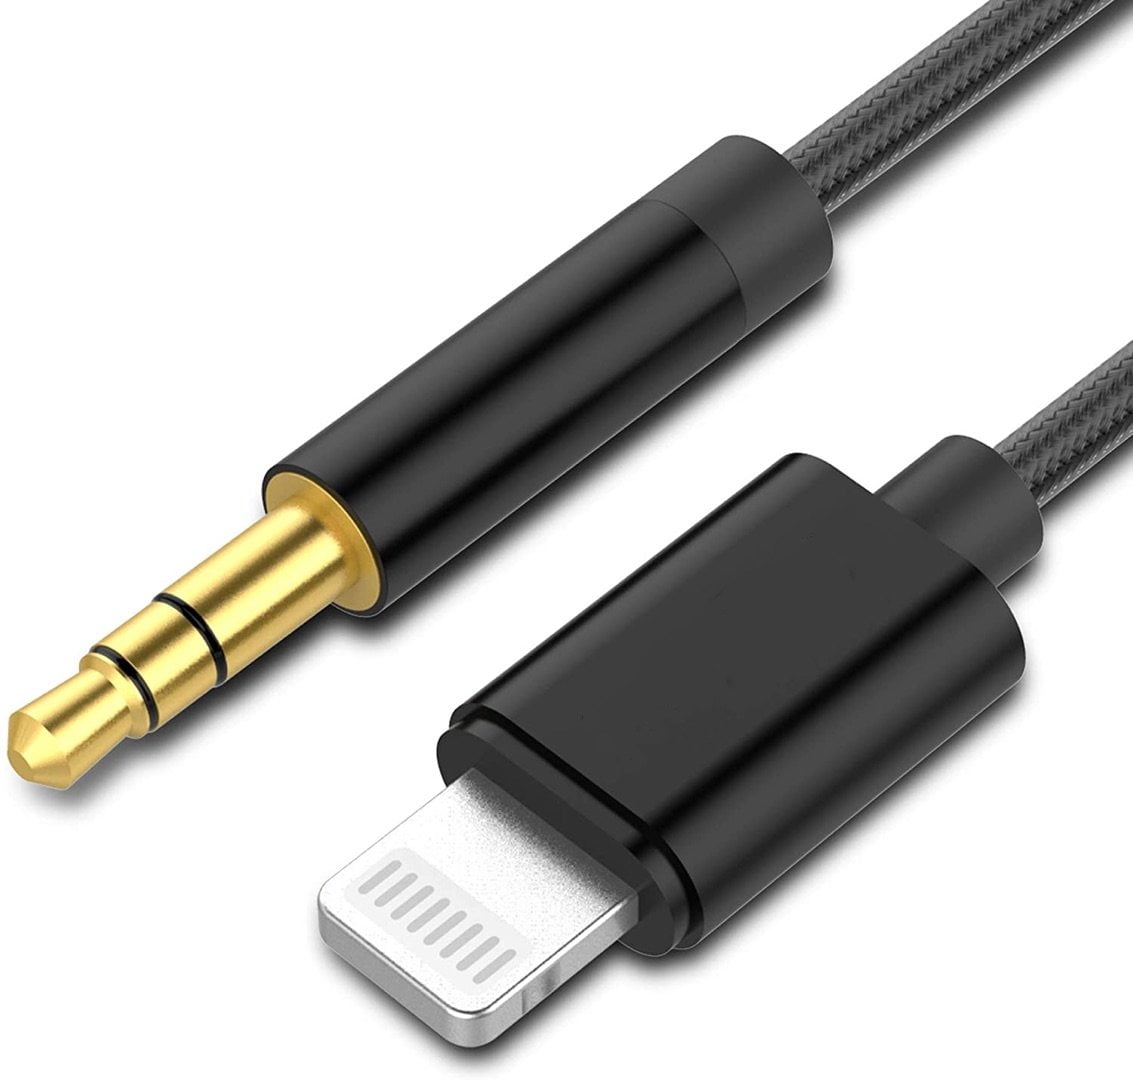 Buy the 3.5mm Male AUX Audio Jack To USB 2.0 Male Charge Cable (1M